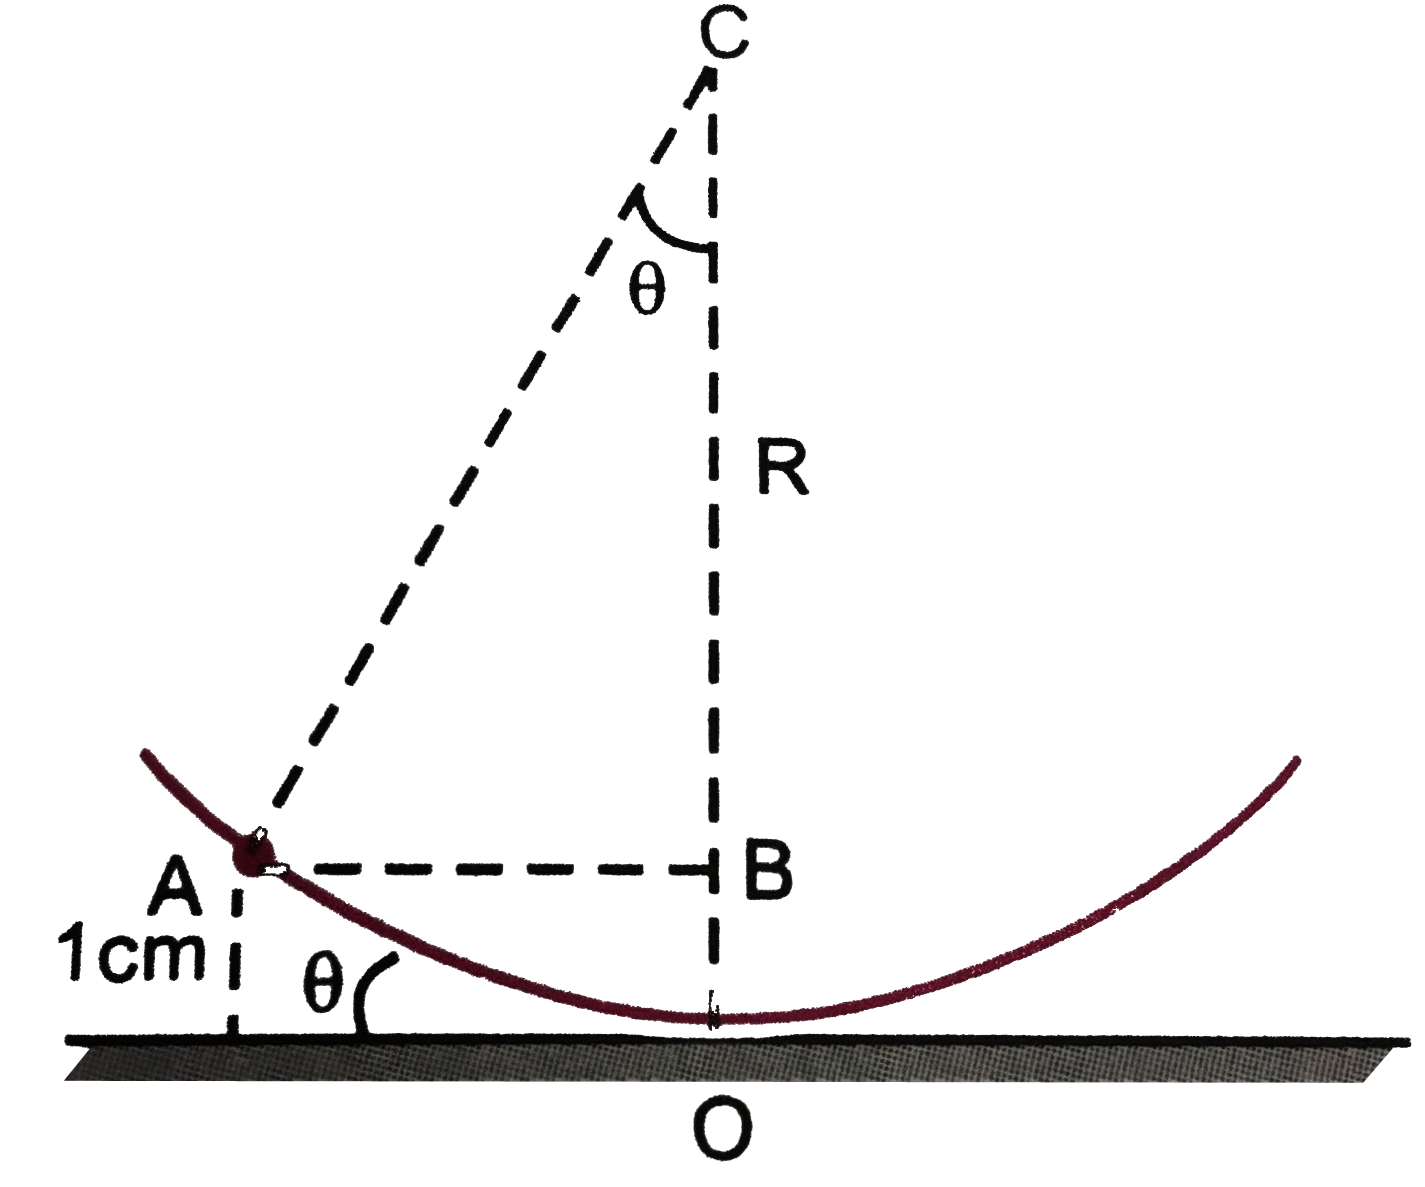 Aparticle of mass 1 g executes an oscillatory motion on the concave surface of a spherical dish of radius 2m placed on a horizontal plane, Figure . If the motion of the particle begins from a point on the dis at a height of 1 cm. from  the horizontal plane and coefficient of friction  is 0.01 , fing the total distance covered by the particle before coming to rest.